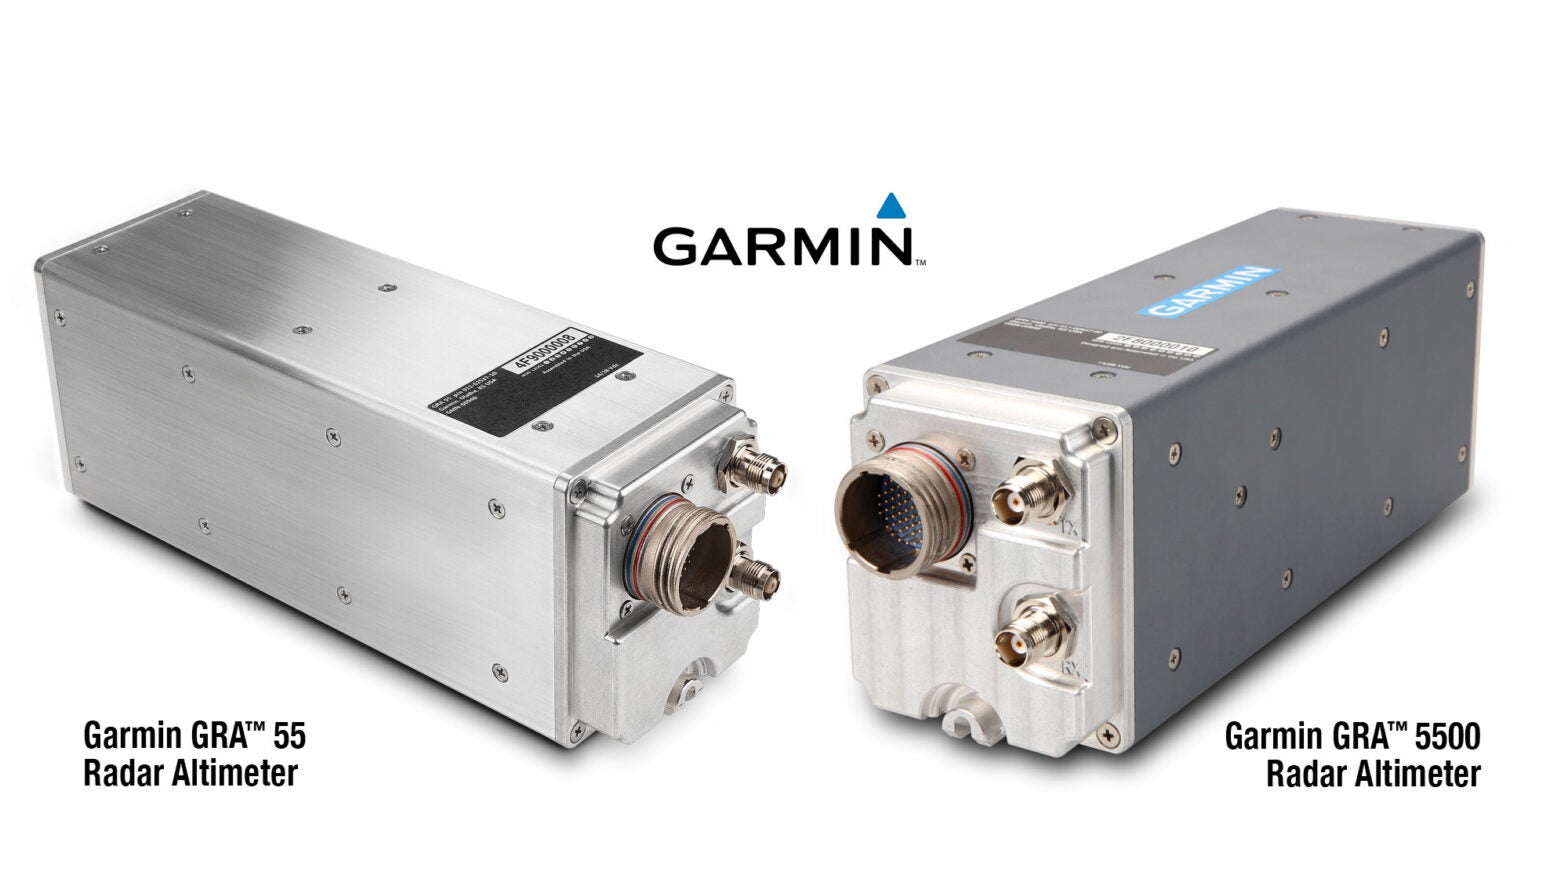 Garmin Joins Coalition to Protect Radio Altimeters From 5G Interference